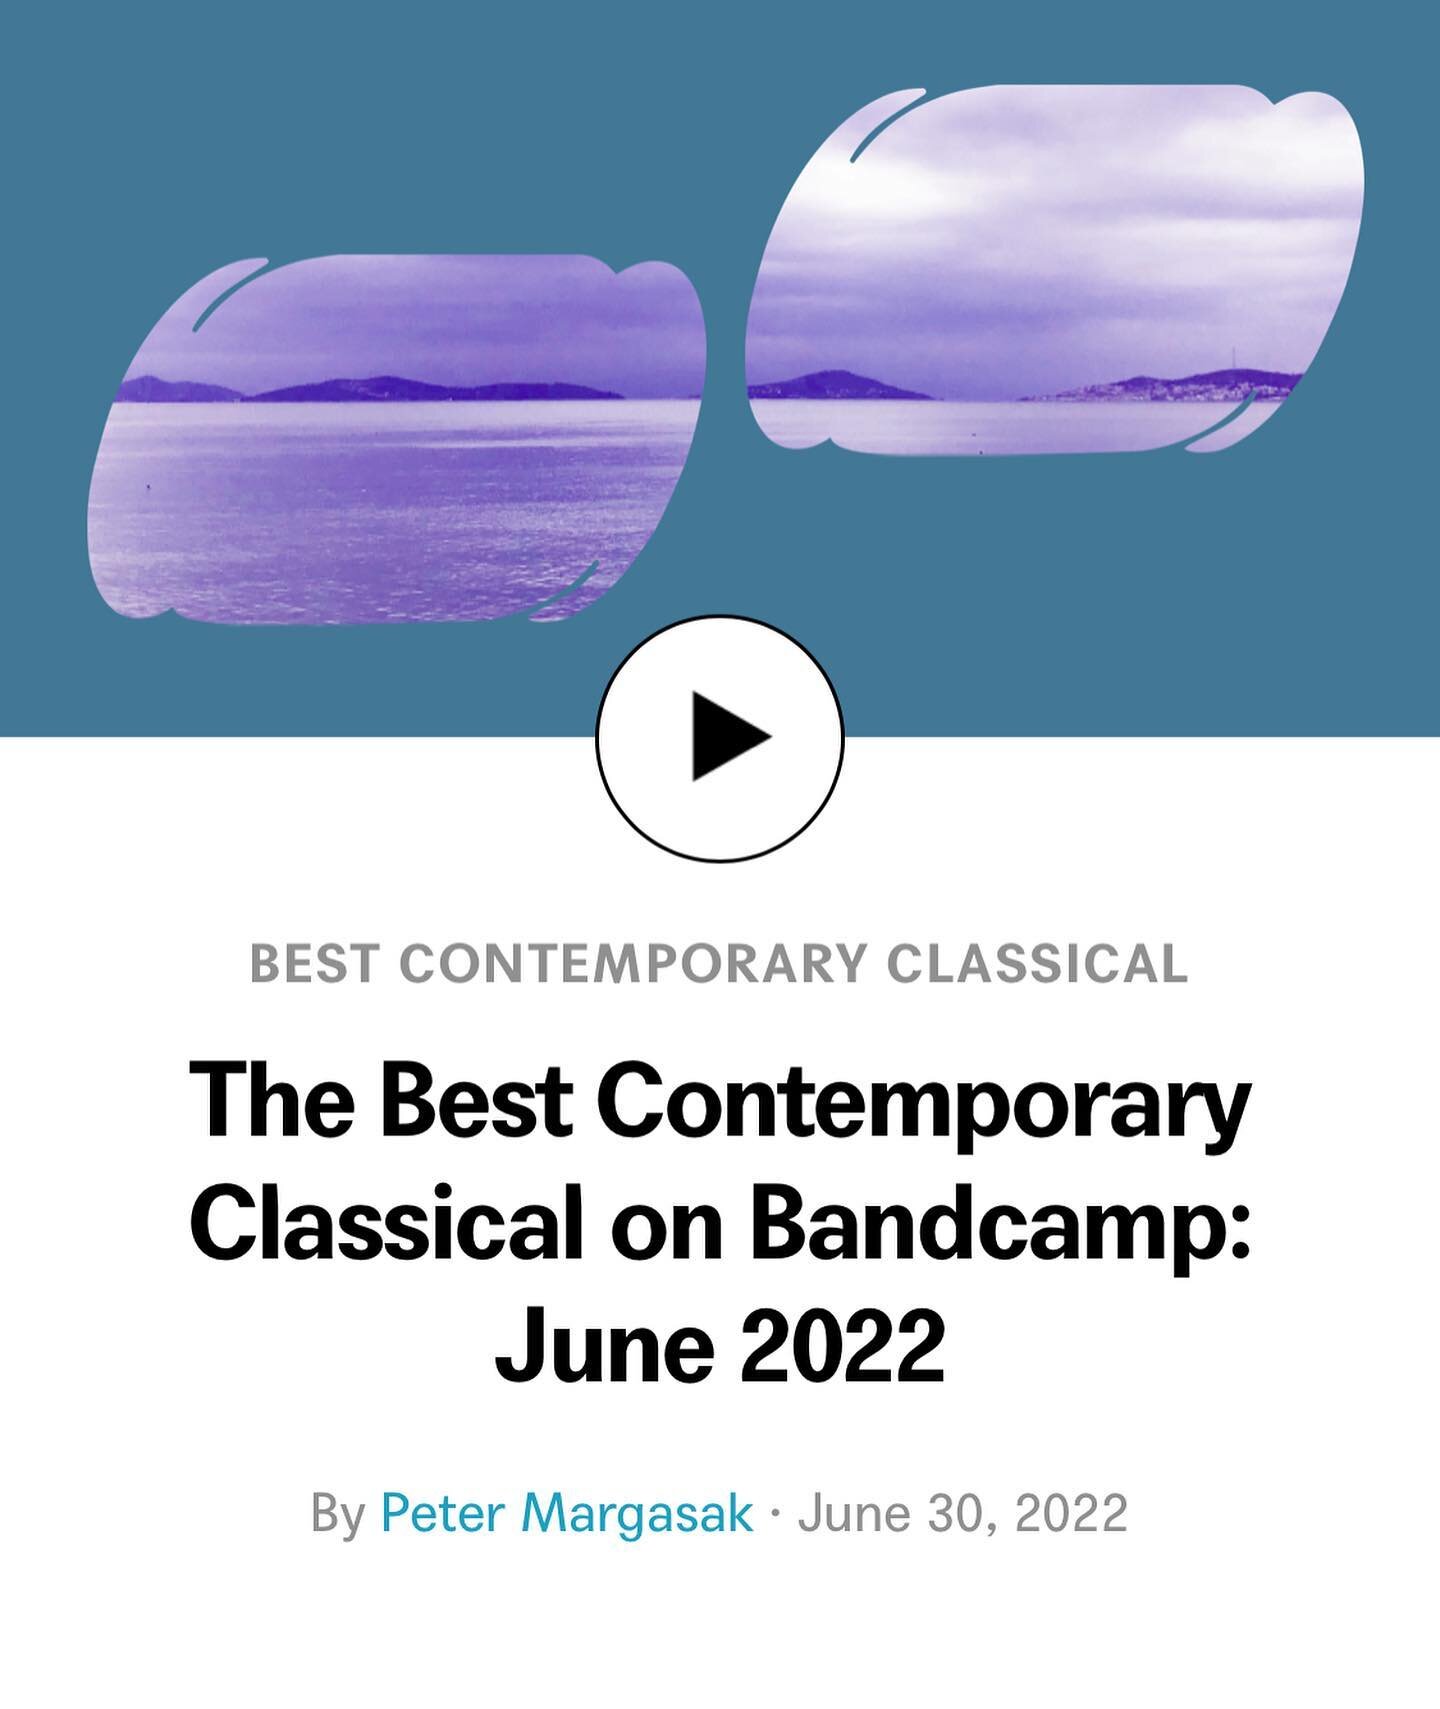 Our album with @finolamerivale  is on @bandcamp &lsquo;s Best Contemporary Classical for this month! Thank you @pmargasak for this wonderful and thoughtful review 💖 Out on @newfocusrecordings now! Link in bio 🔗